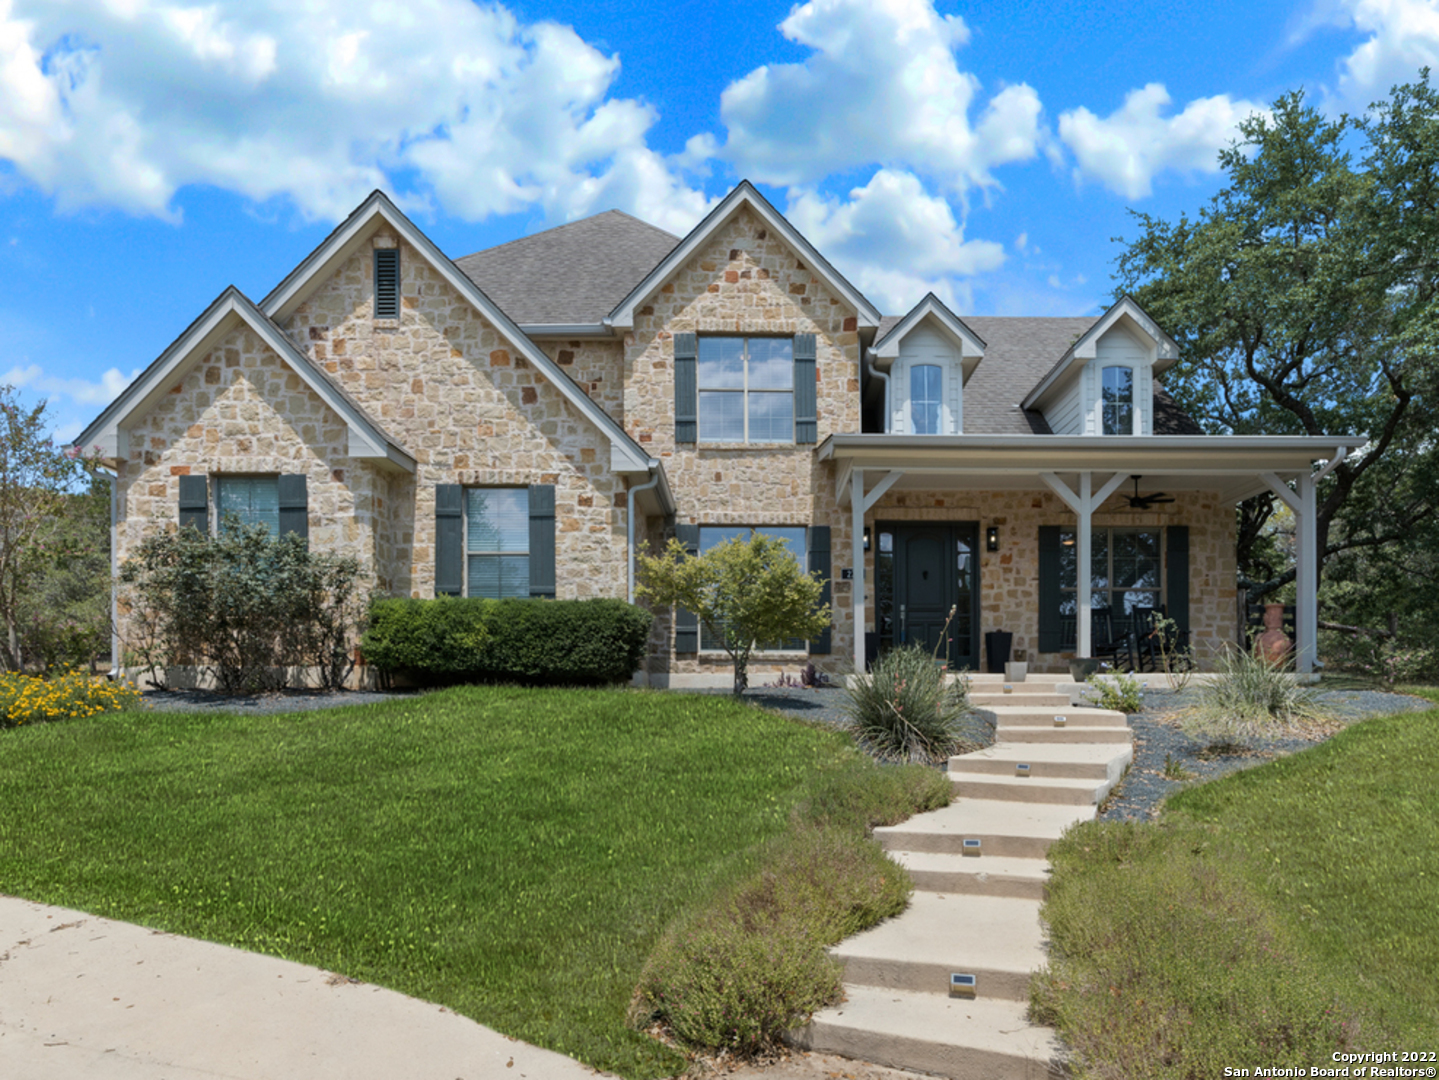 Open House 1-4pm Sunday July 31. Custom built two story on .66 acres with incredible views! Elegant hill country living just minutes away from San Antonio. Gourmet kitchen features a built-in refrigerator, granite counters, knotty alder cabinets and multiple eating areas. Spacious master suite with sitting area, garden tub, large walk-in closet plus a great view! Stained concrete floors throughout first level. Private office plus full bedroom and bath on 1st floor. Game room could be used as 5th bedroom or media room! Neighborhood amenities include horse stables & arena, community park, playground, walking trail, exercise facility plus a seasonal creek and fishing pond!